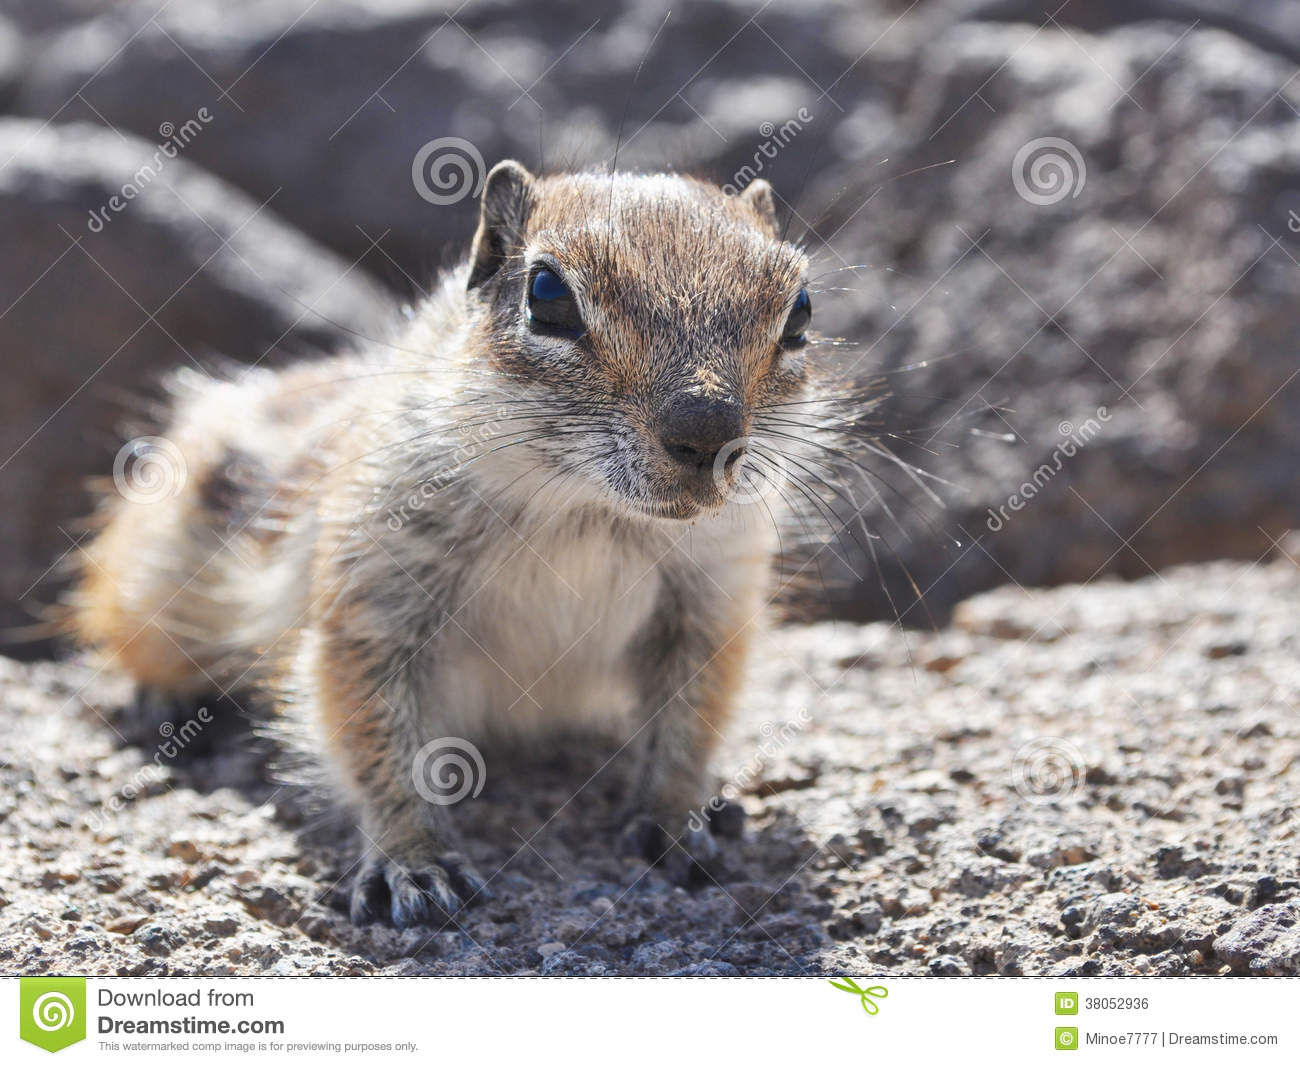 Barbary Ground Squirrel clipart #11, Download drawings